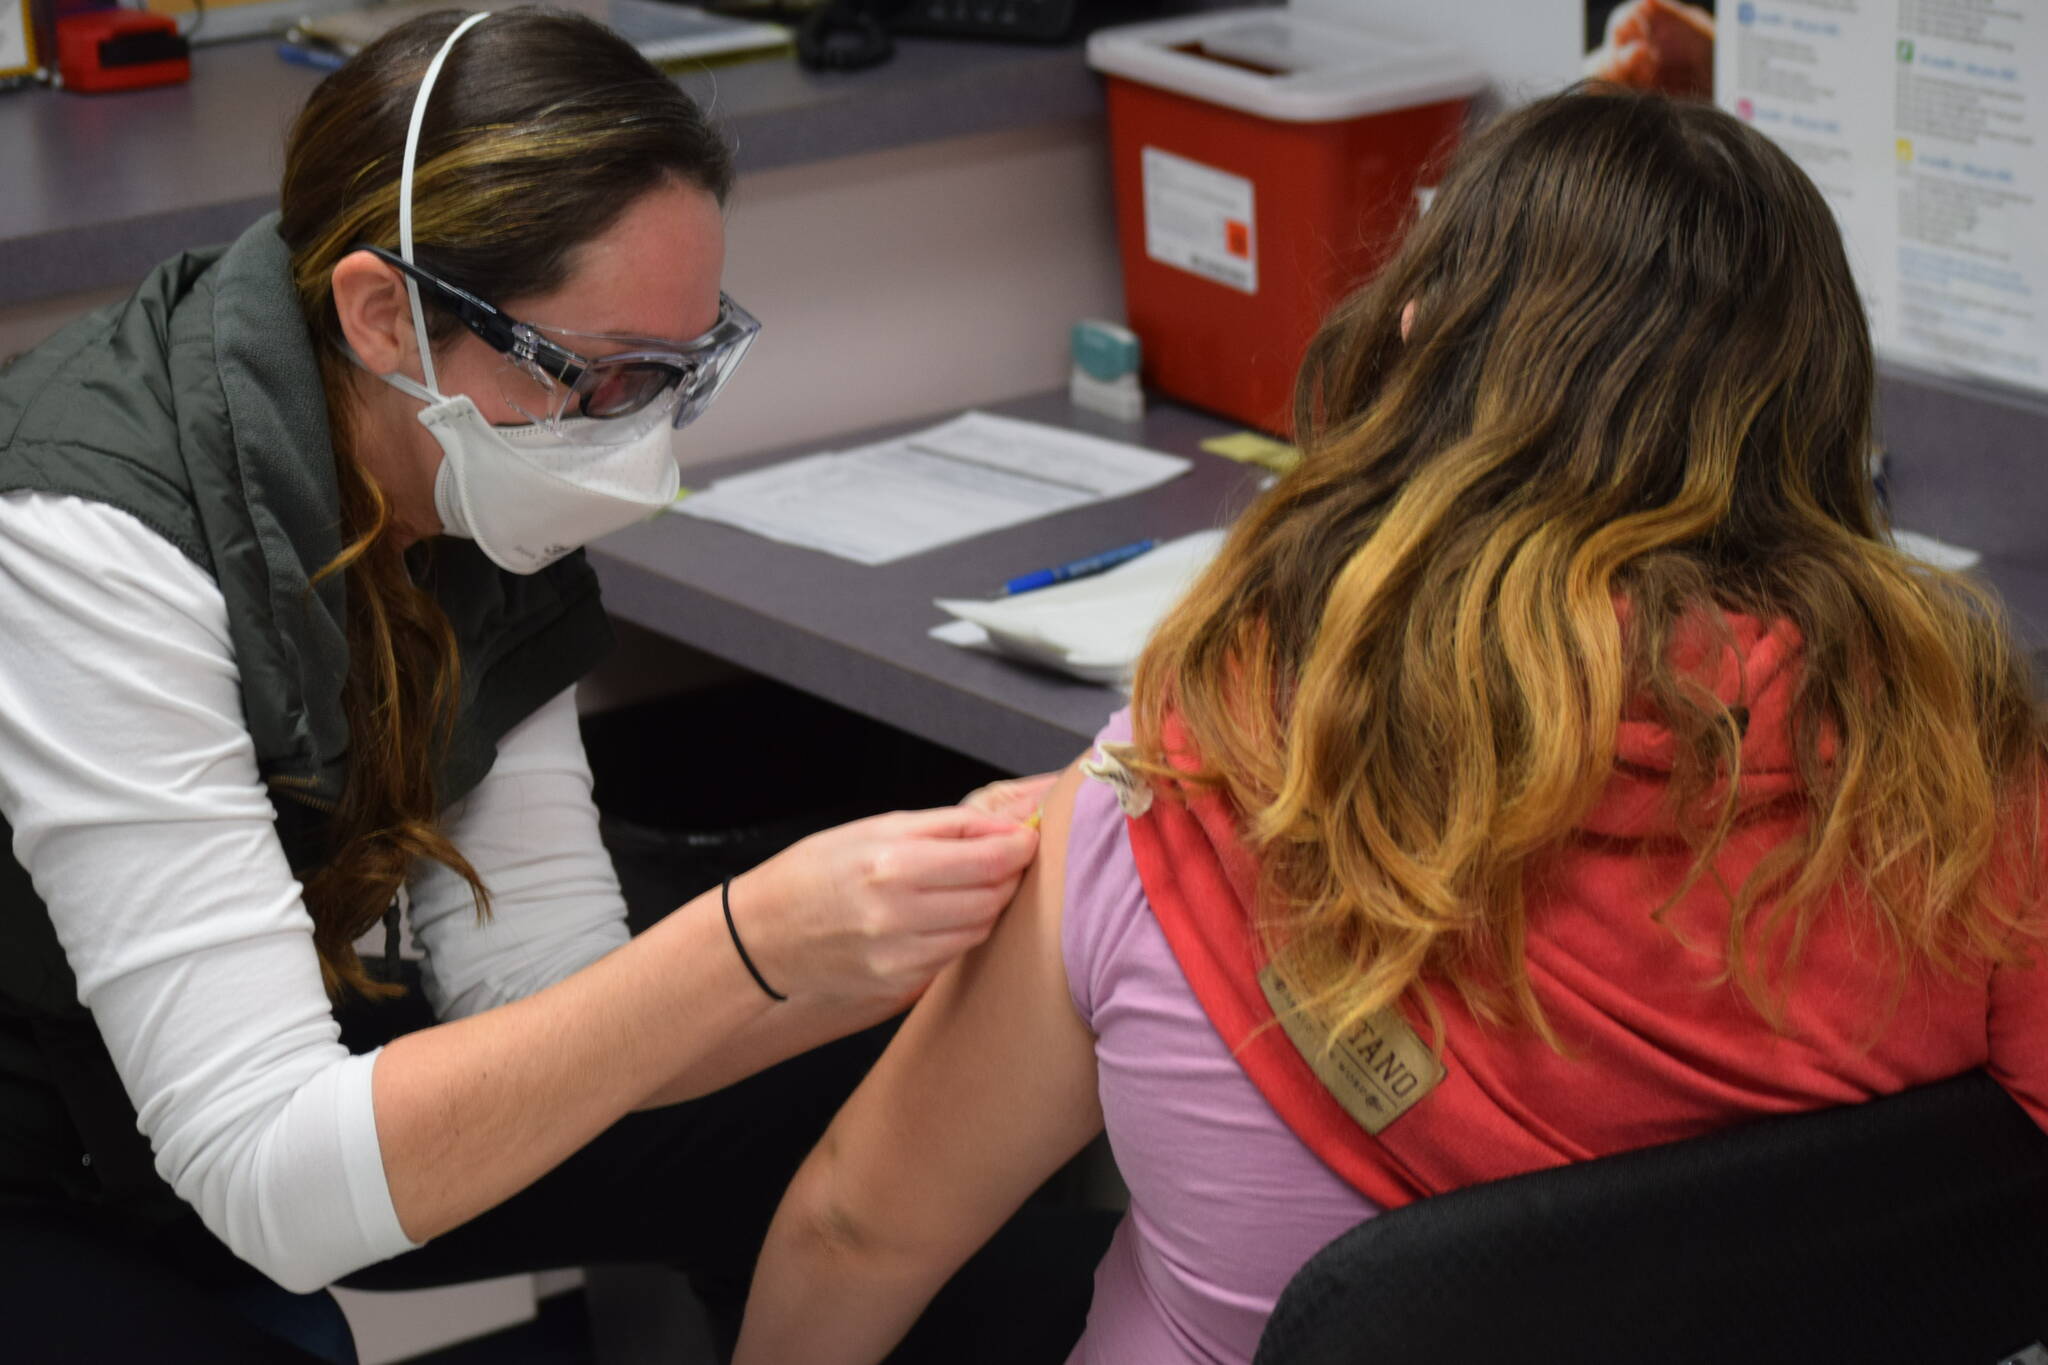 Nurse Sherra Pritchard gives Madyson Knudsen a bandage at the Kenai Public Health Center after the ten-year-old received her first COVID-19 vaccine on Friday, Nov. 5, 2021. (Camille Botello/Peninsula Clarion)